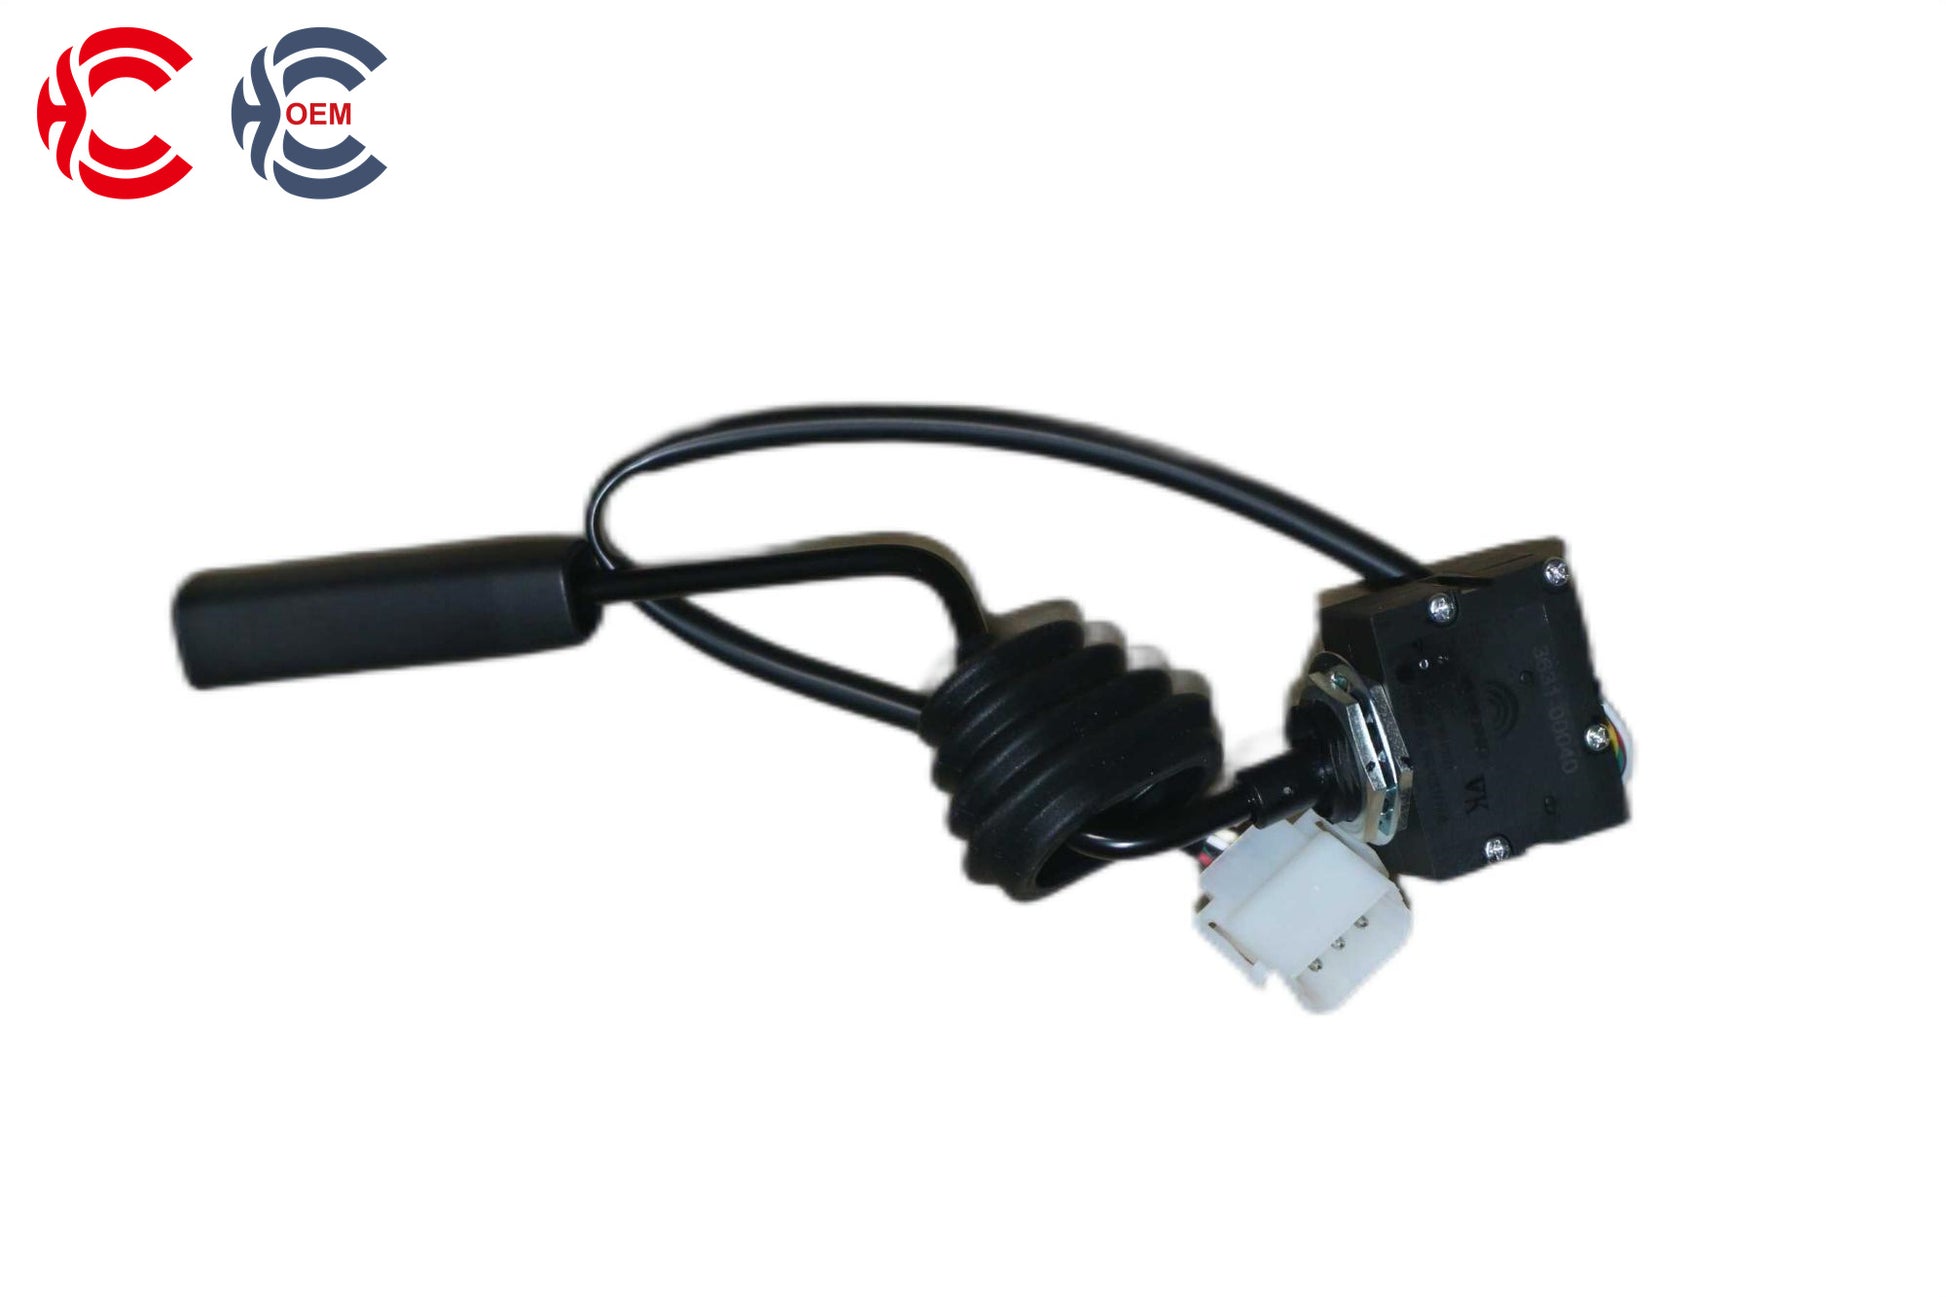 OEM: 3631-00040Material: ABS MetalColor: Black SilverOrigin: Made in ChinaWeight: 200gPacking List: 1* Retarder Handle Switch More ServiceWe can provide OEM Manufacturing serviceWe can Be your one-step solution for Auto PartsWe can provide technical scheme for you Feel Free to Contact Us, We will get back to you as soon as possible.